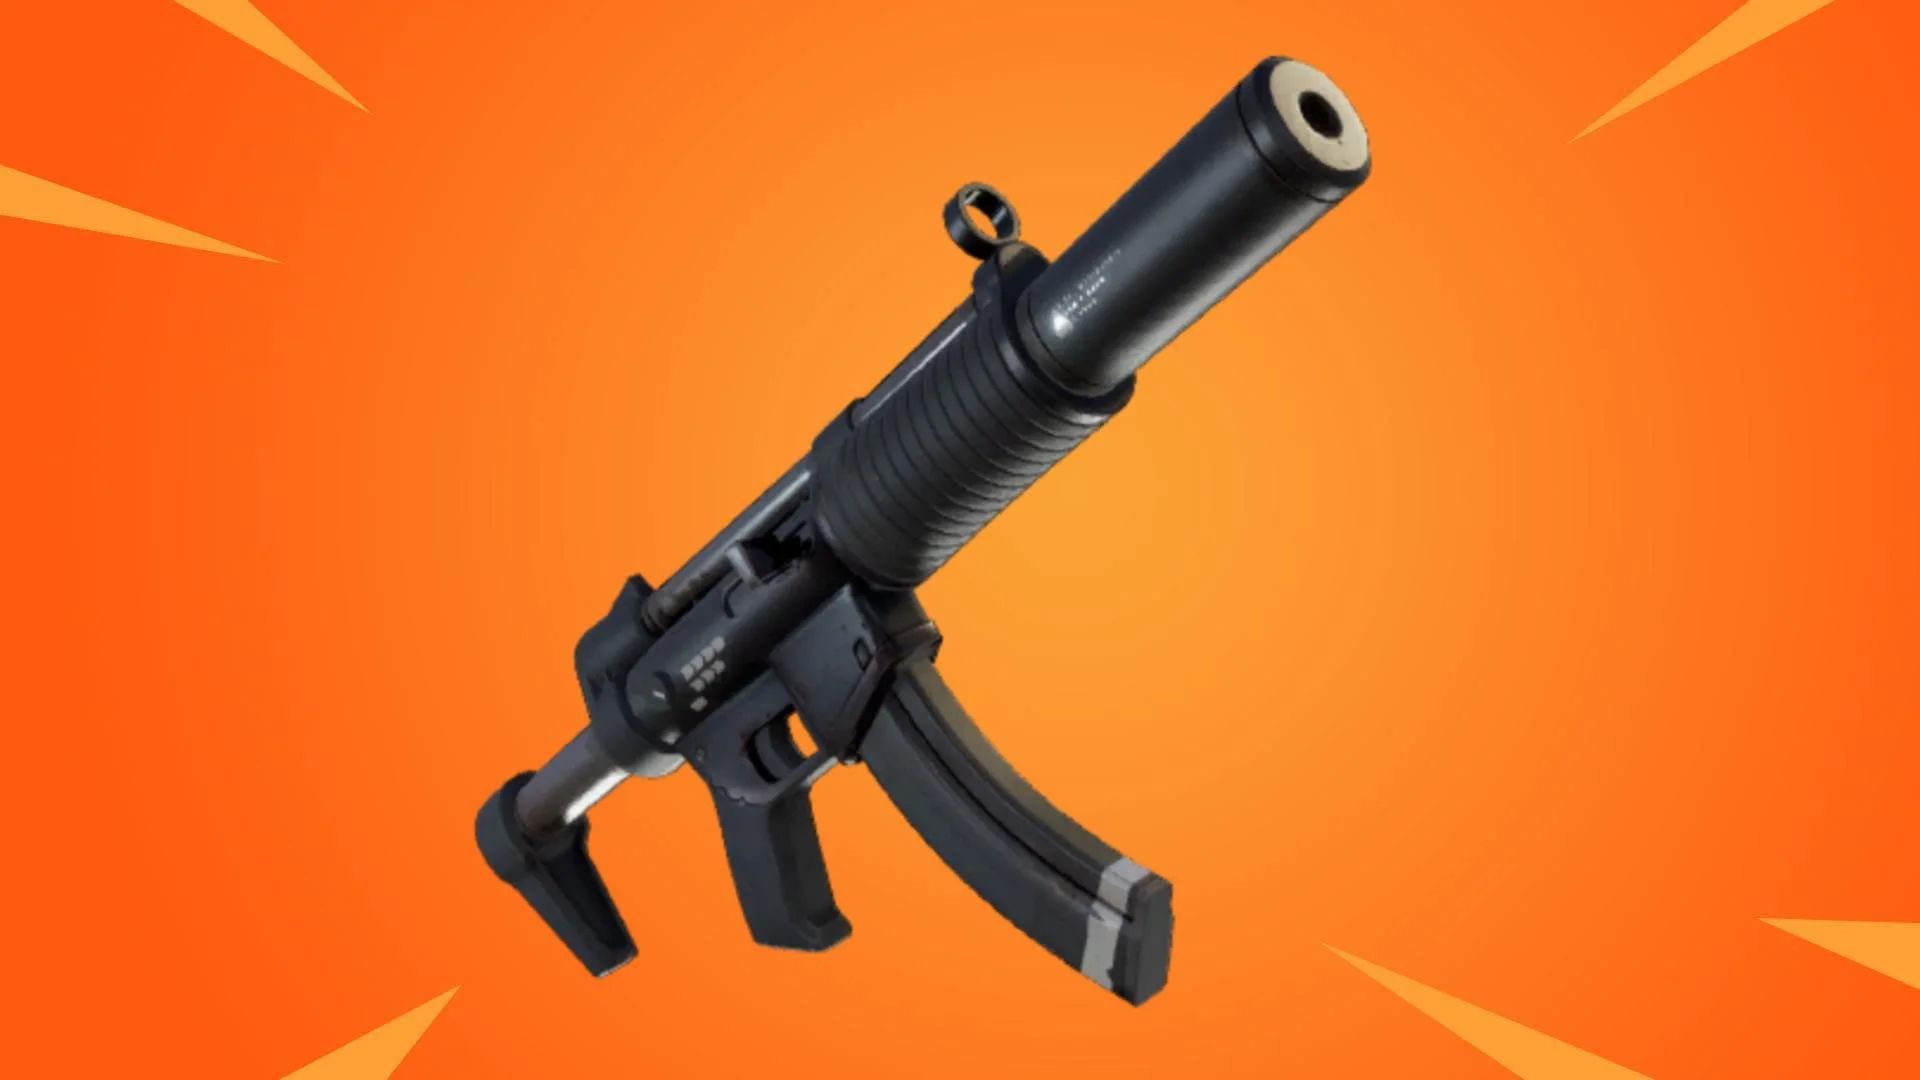 In this article, we will be covering Fortnite Shadow of Phantasm quests: Shadow Bomb, Shield Bubble, Suppressed SMG, and Suppressed Assault Rifle location.